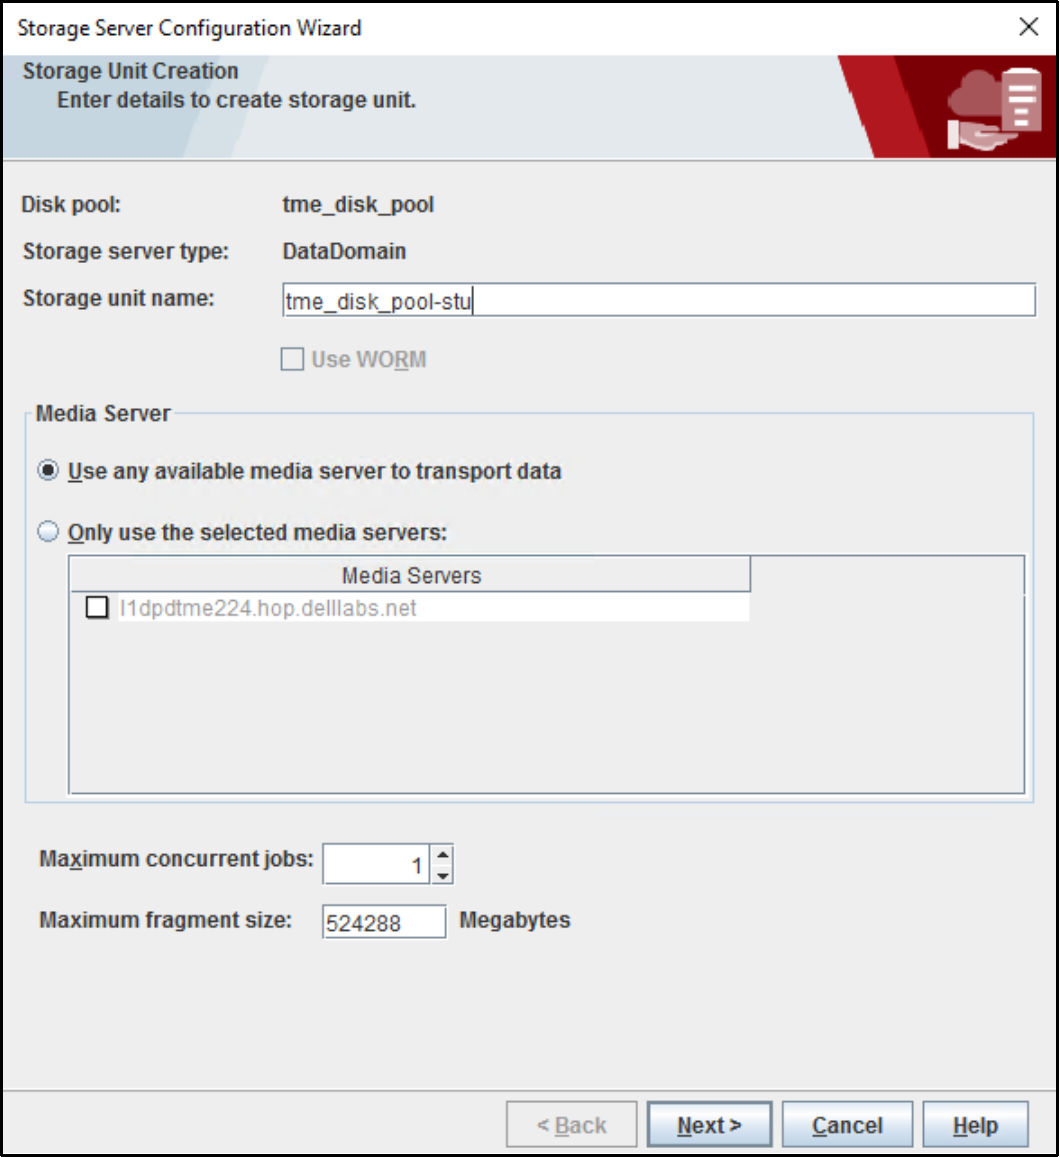 This image shows the option to create storage unit using the disk pool created